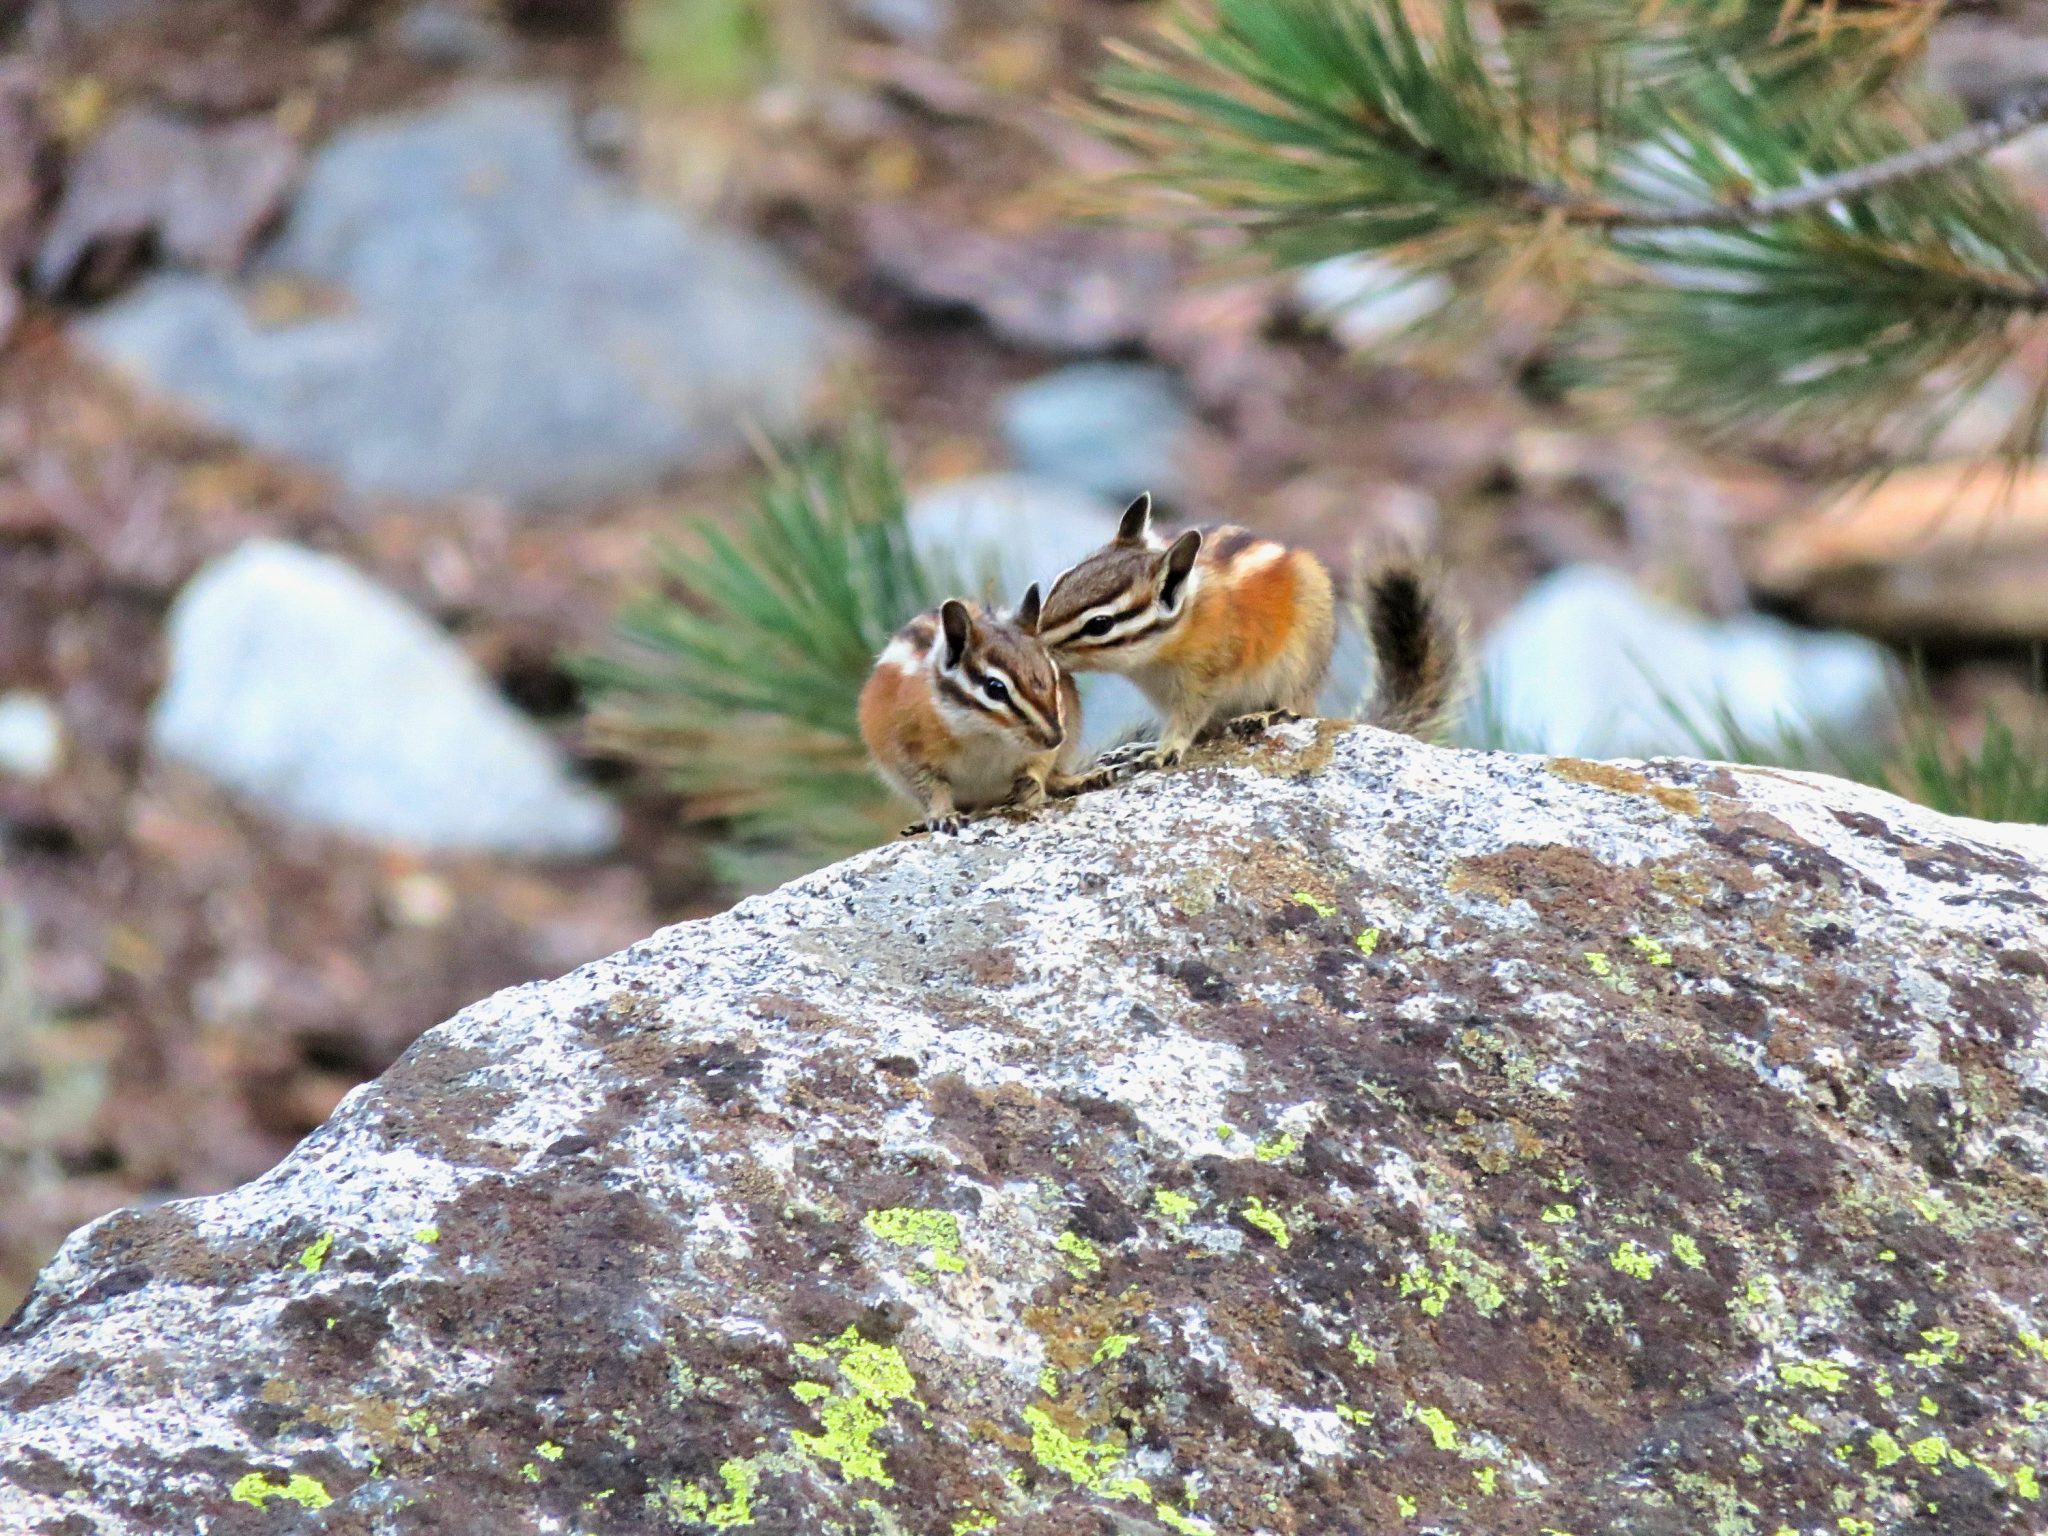 All the animals I saw in Yosemite National Park - Sightseeing Scientist